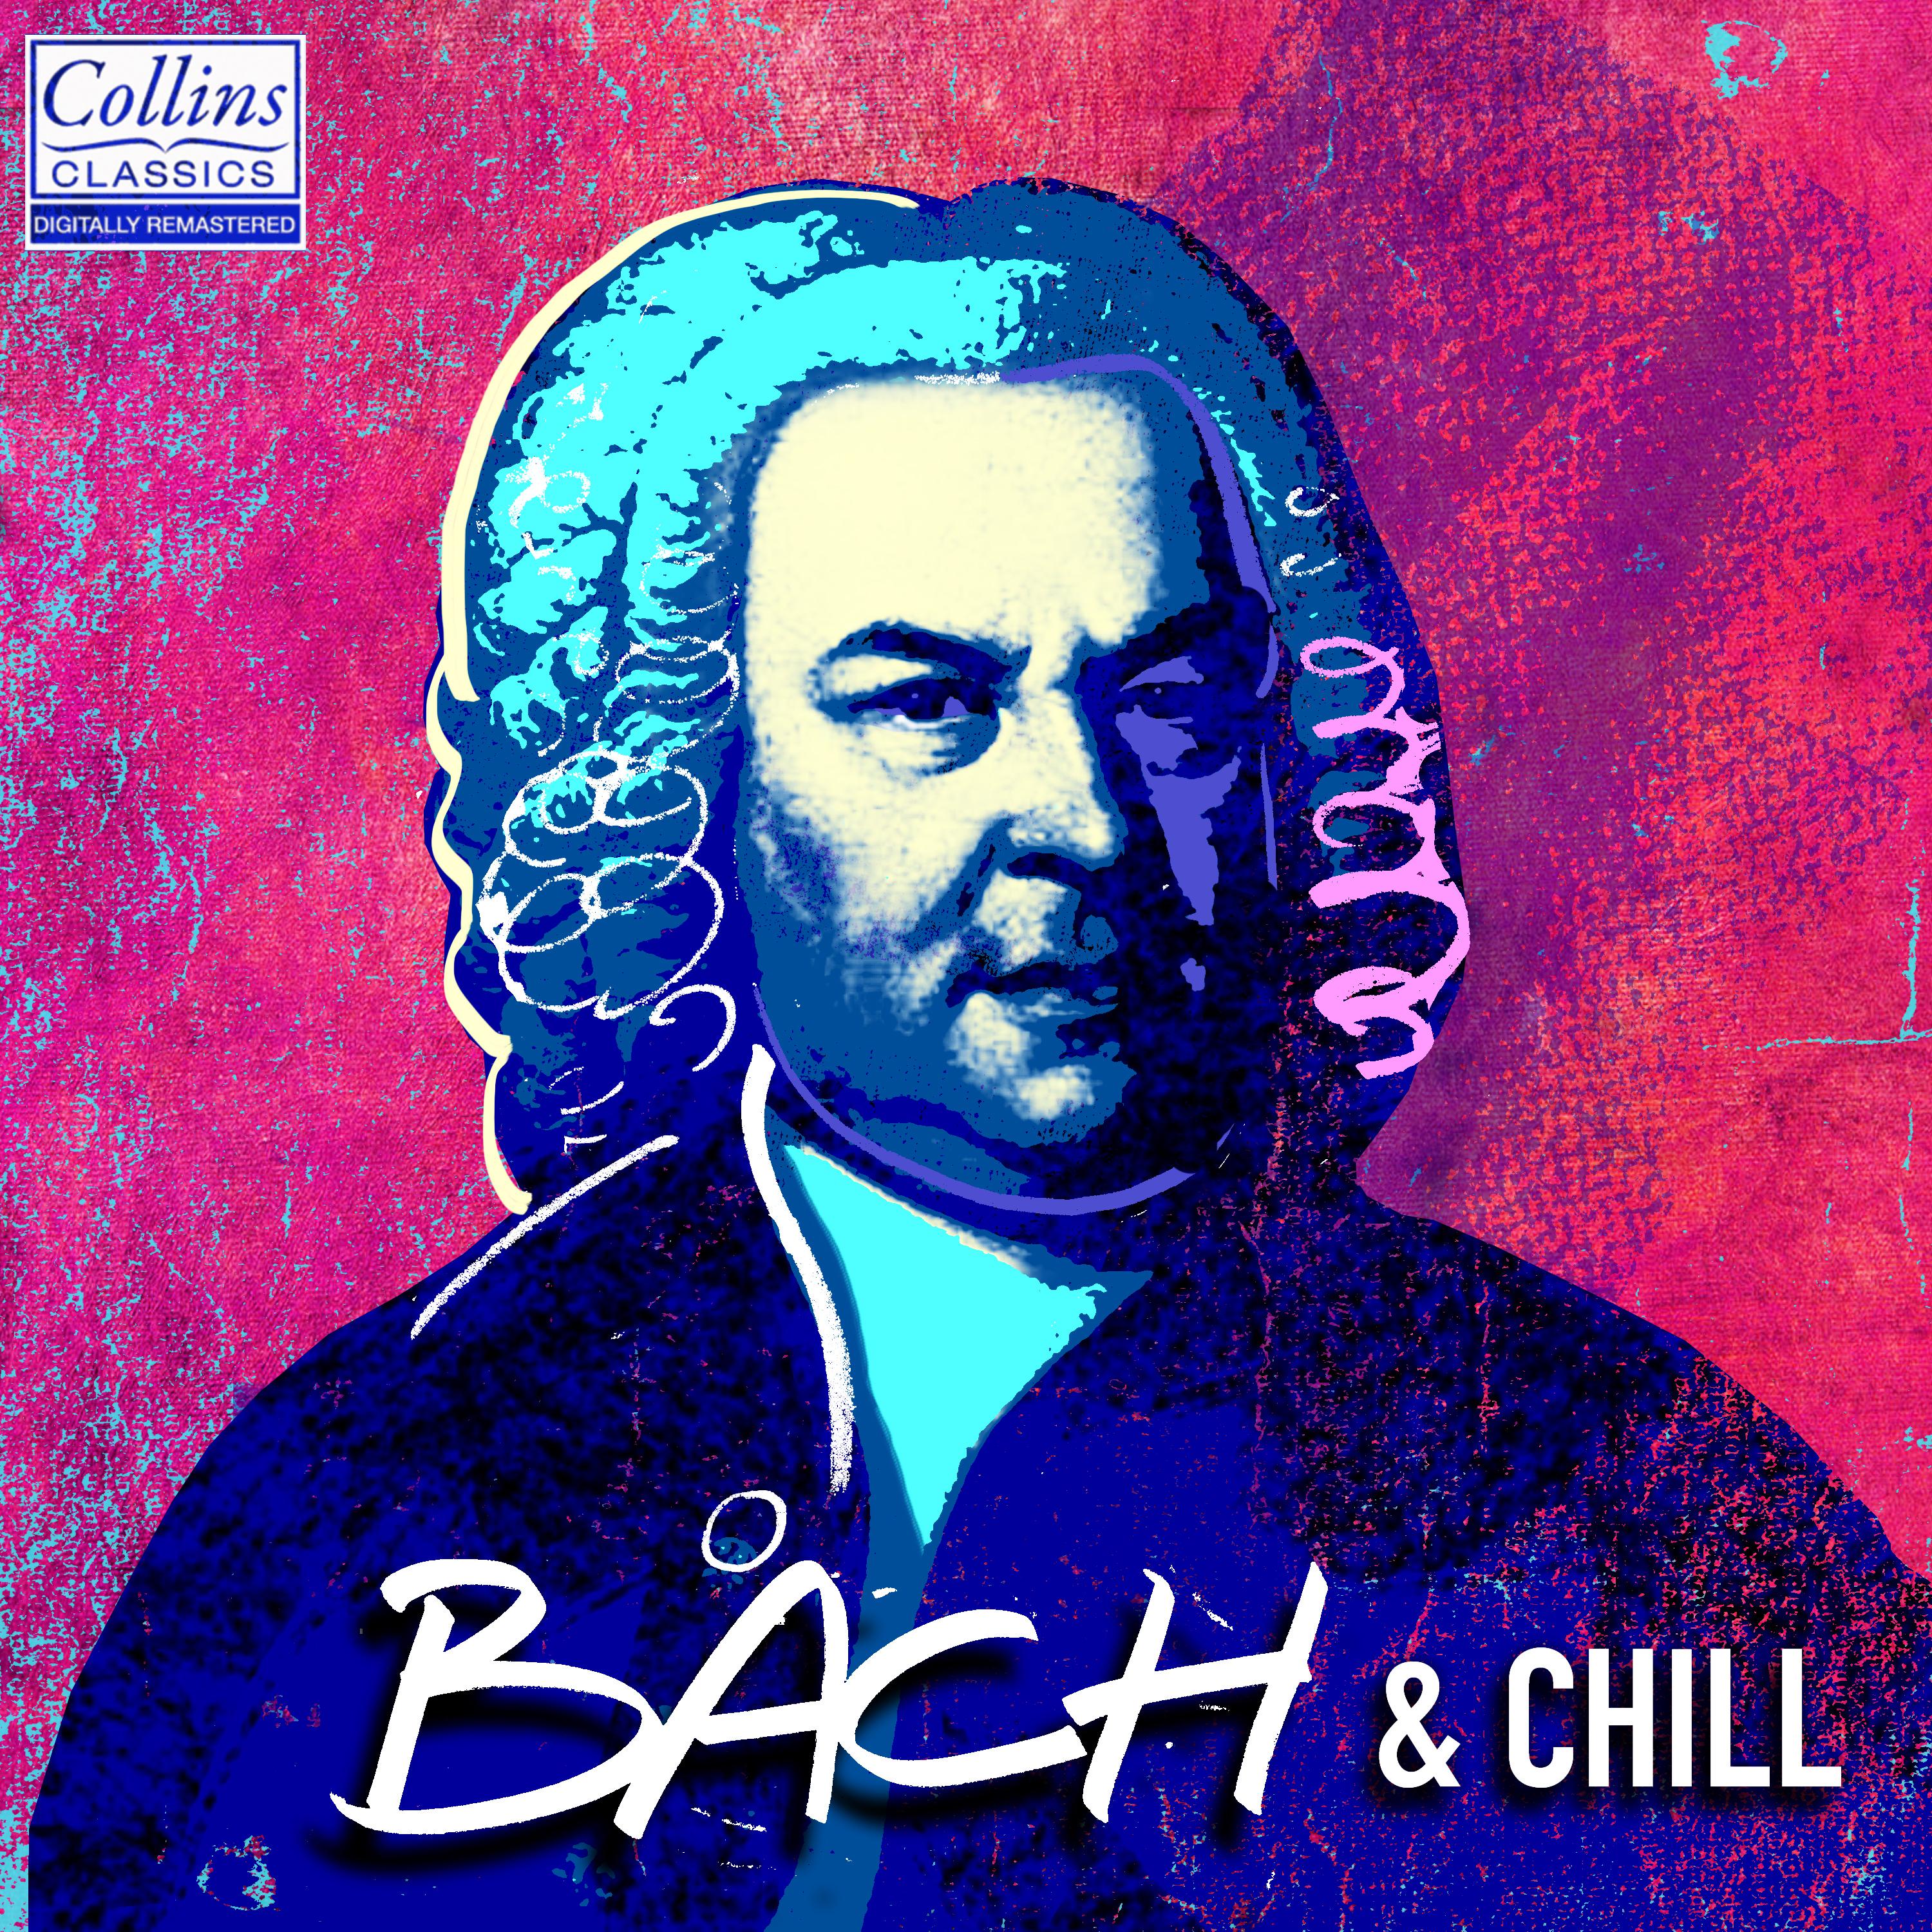 Orchestral Suite No.2 in B Minor, BWV 1067: V. Polonaise And Double